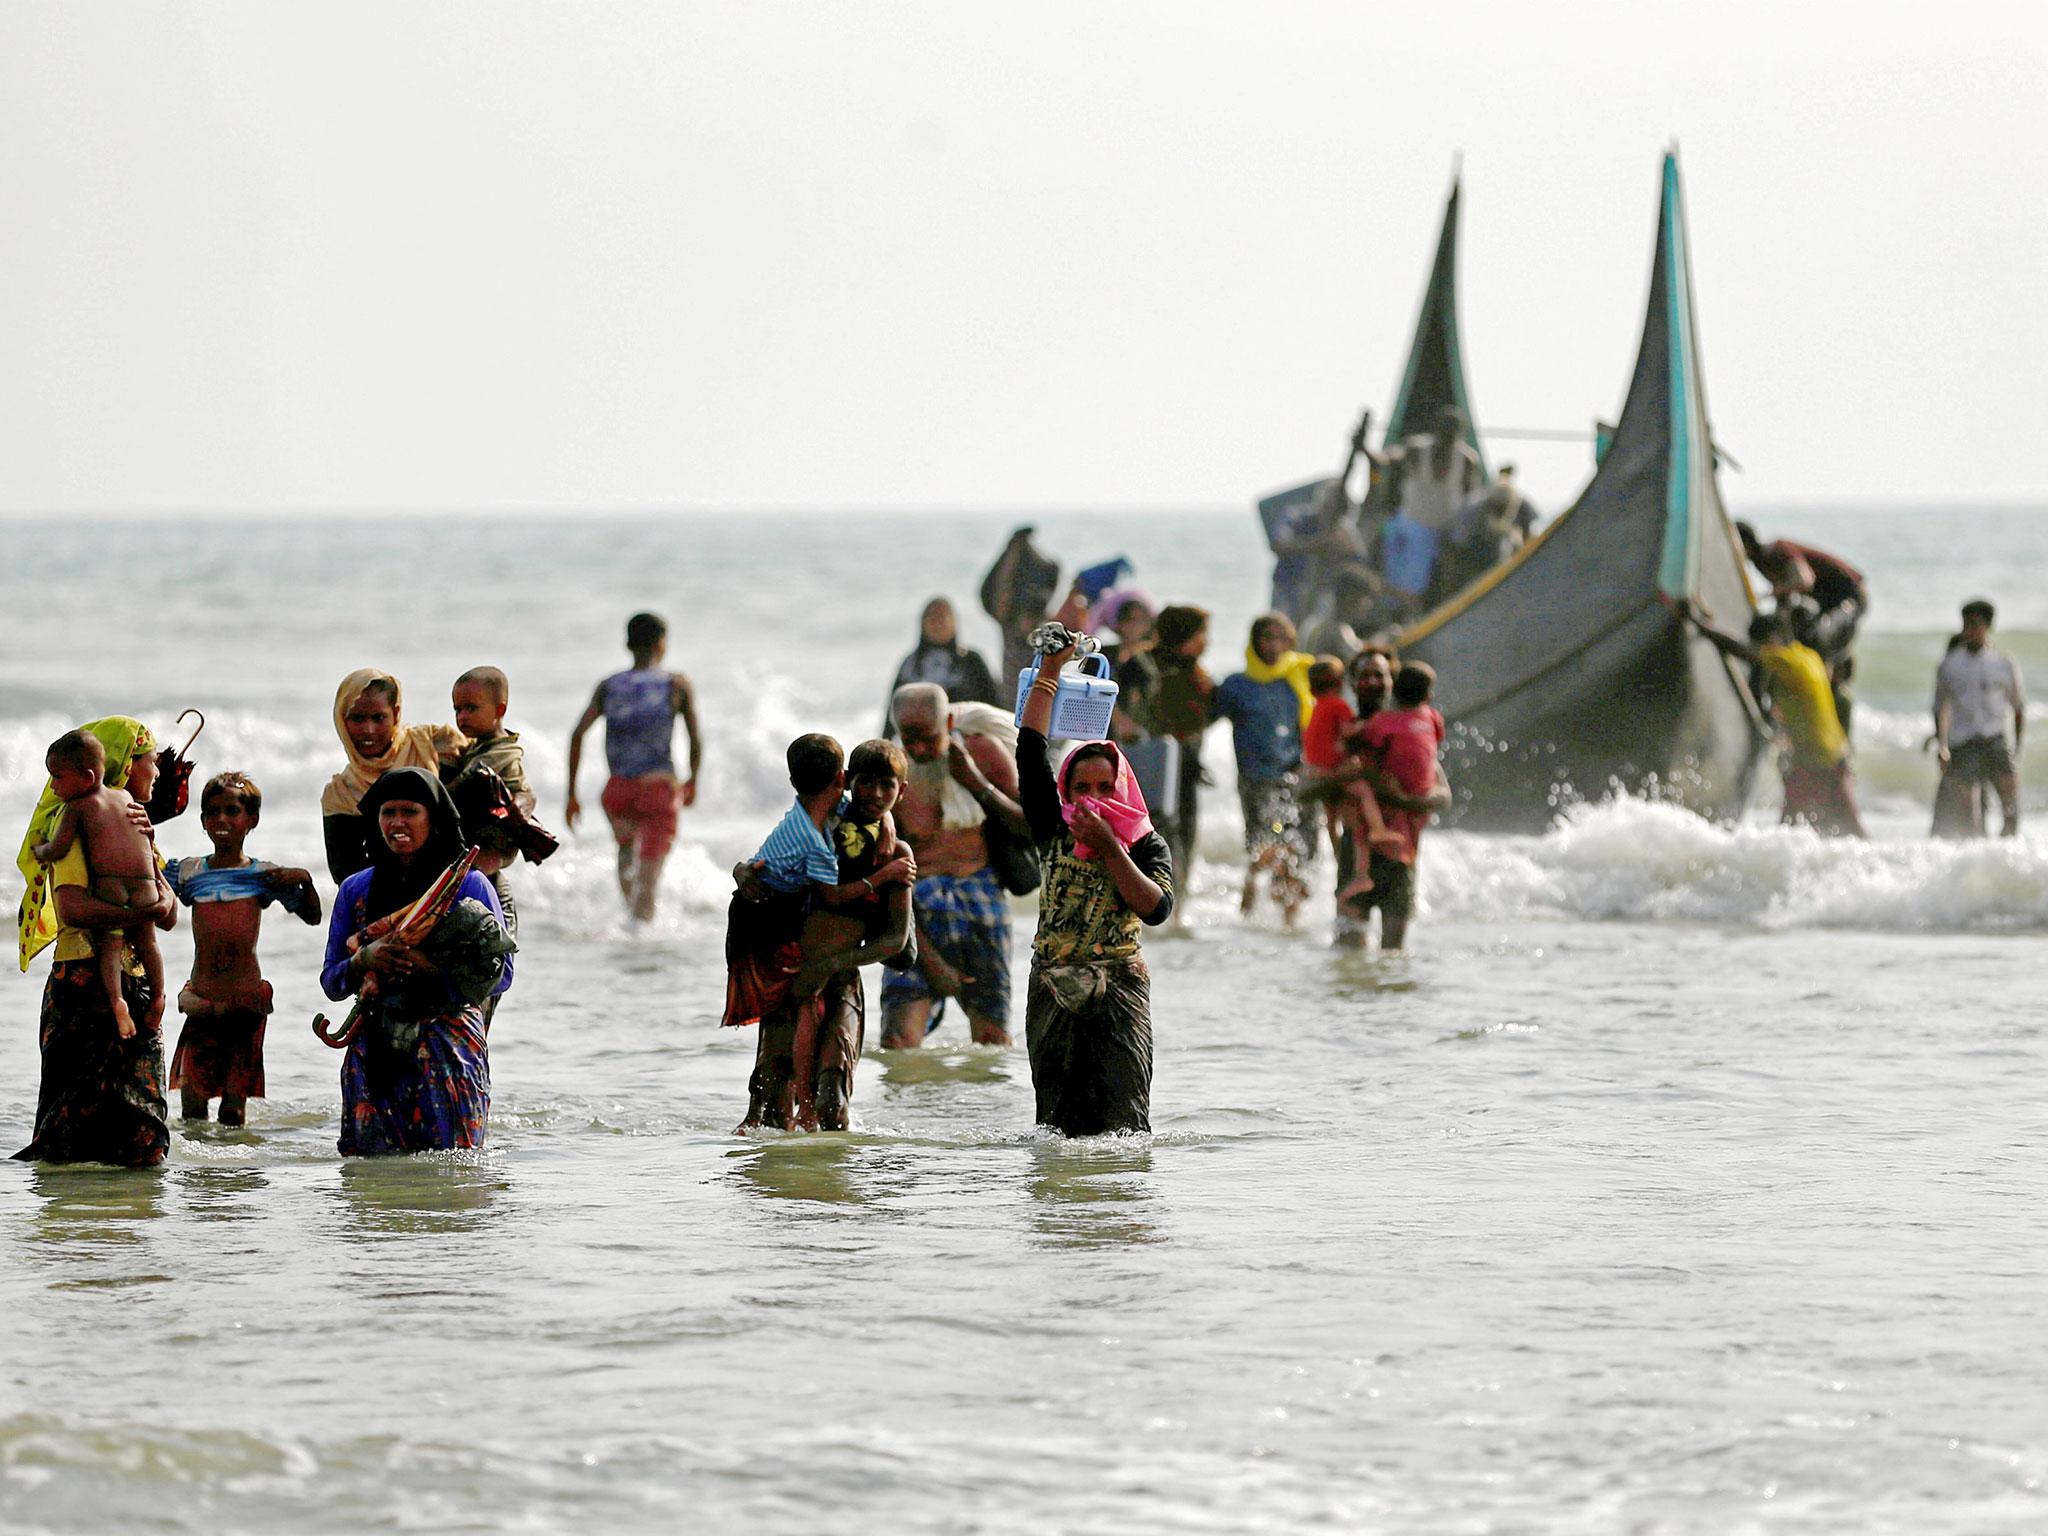 Rohingya refugees walk to the shore after crossing the Bangladesh-Myanmar border by boat through the Bay of Bengal in Teknaf, Bangladesh